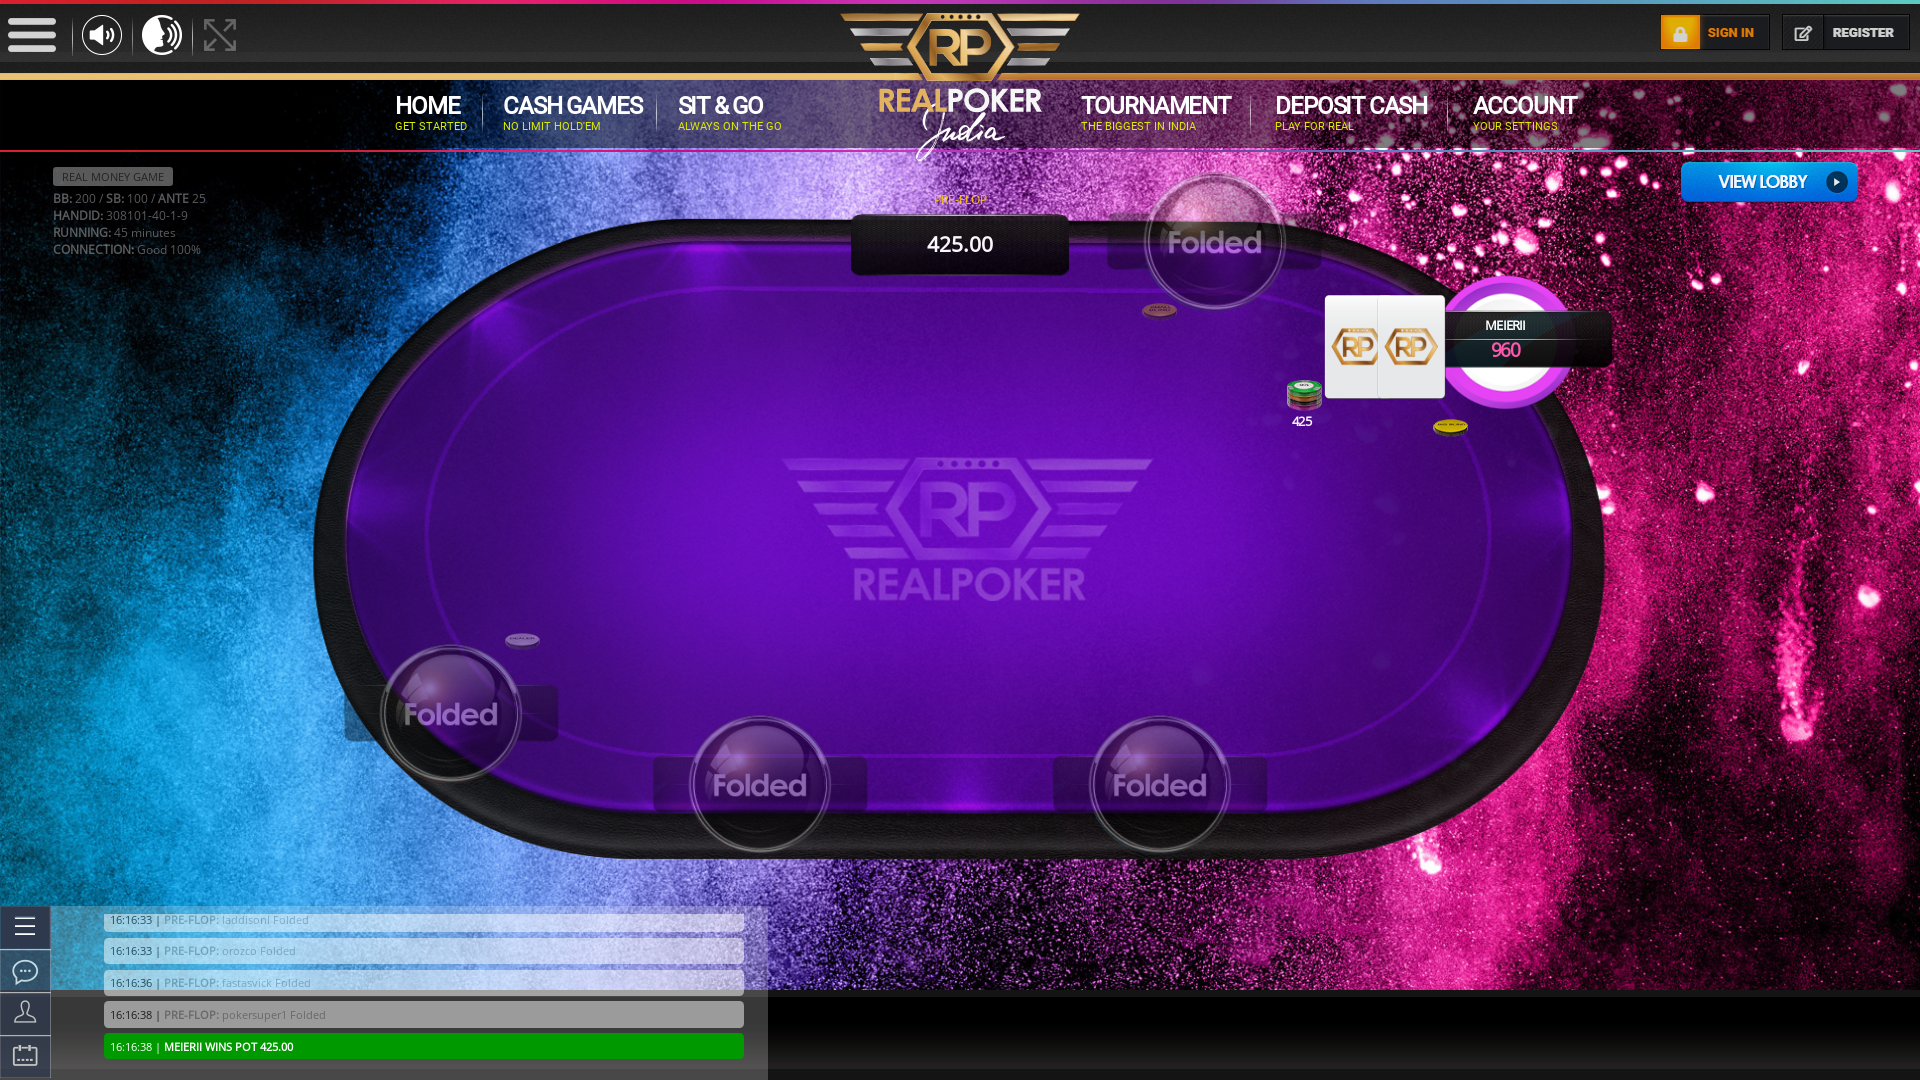 Real poker 10 player table in the 45th minute